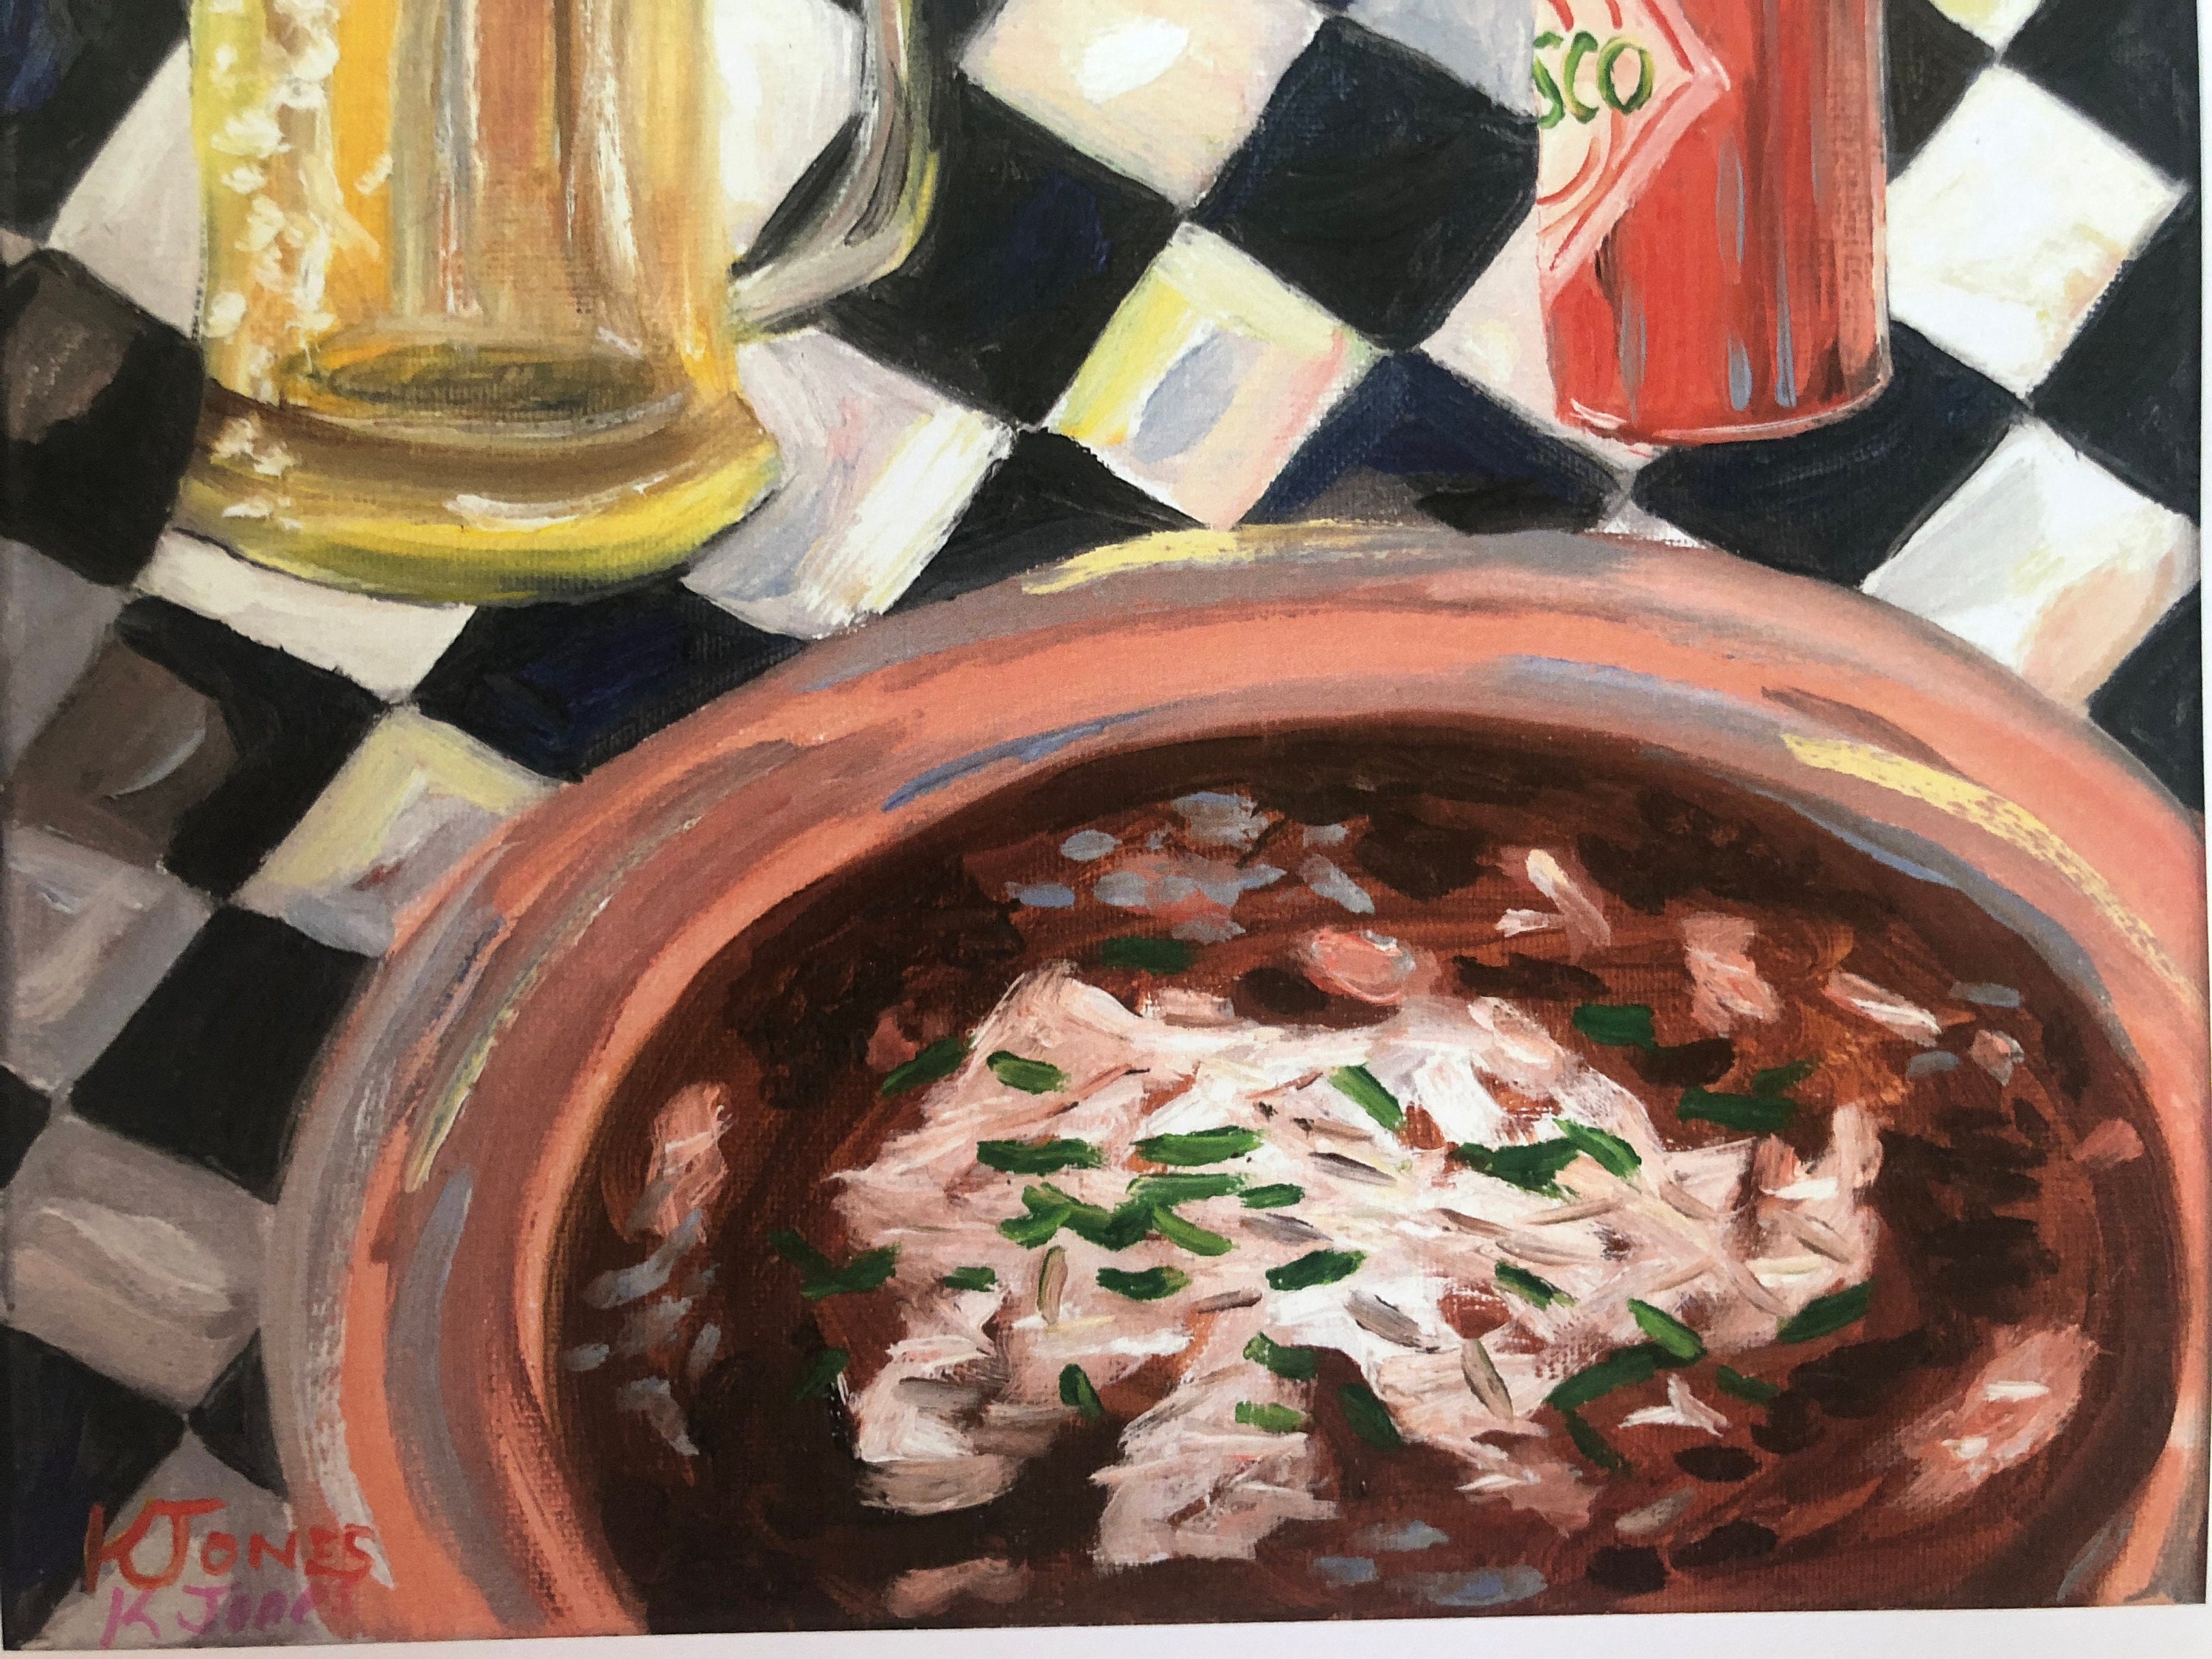 Gumbo & Beer | 8 X 10 Inch Print Of Painting Louisiana Still Life New Orleans French Quarter Art Seafood Gumbo Tabasco Beer